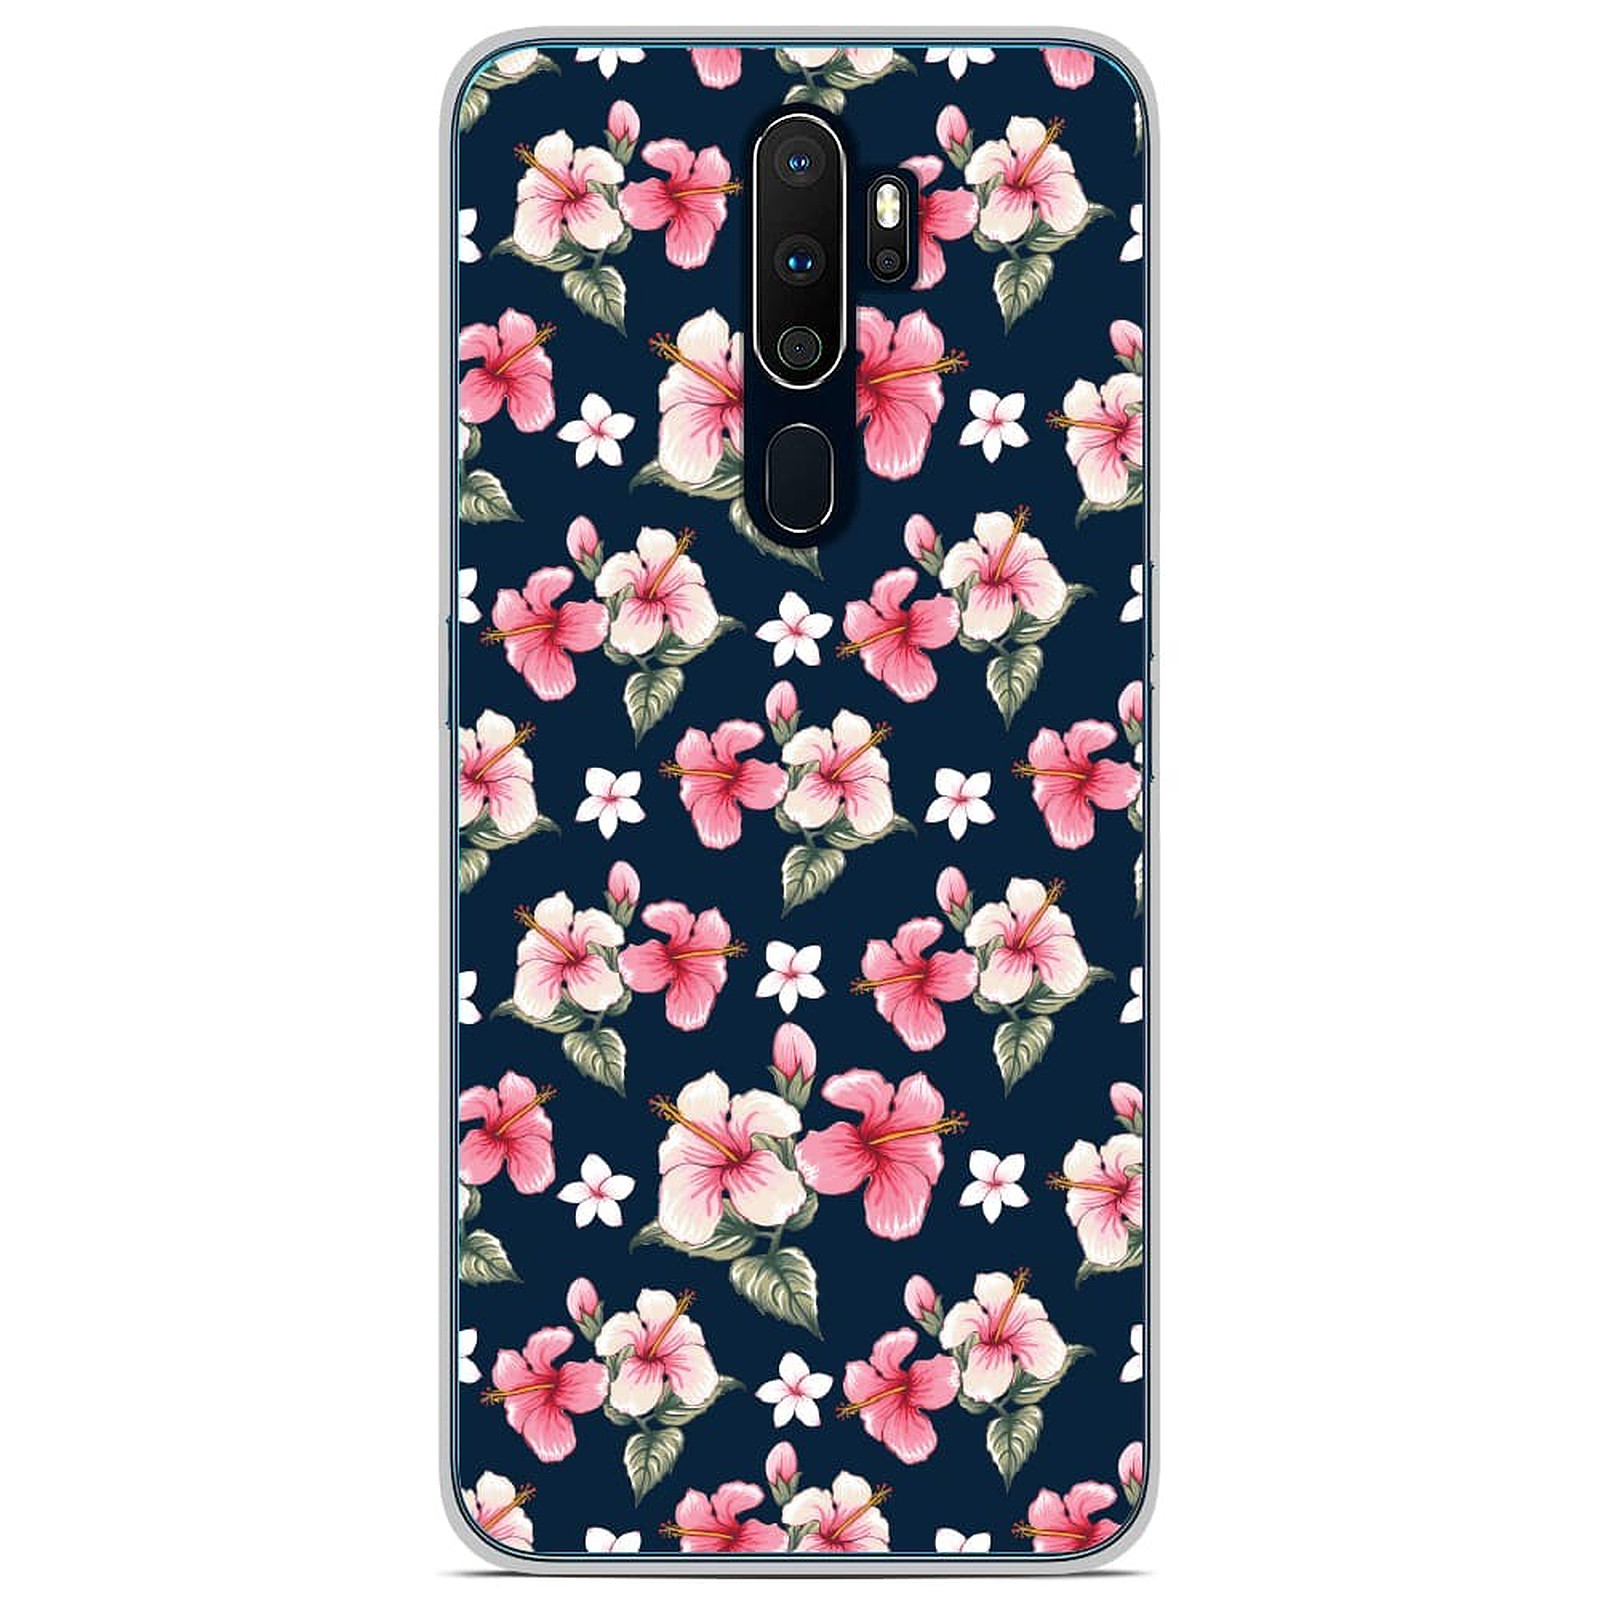 1001 Coques Coque silicone gel Oppo A9 2020 motif Hibiscus Vintage - Coque telephone 1001Coques